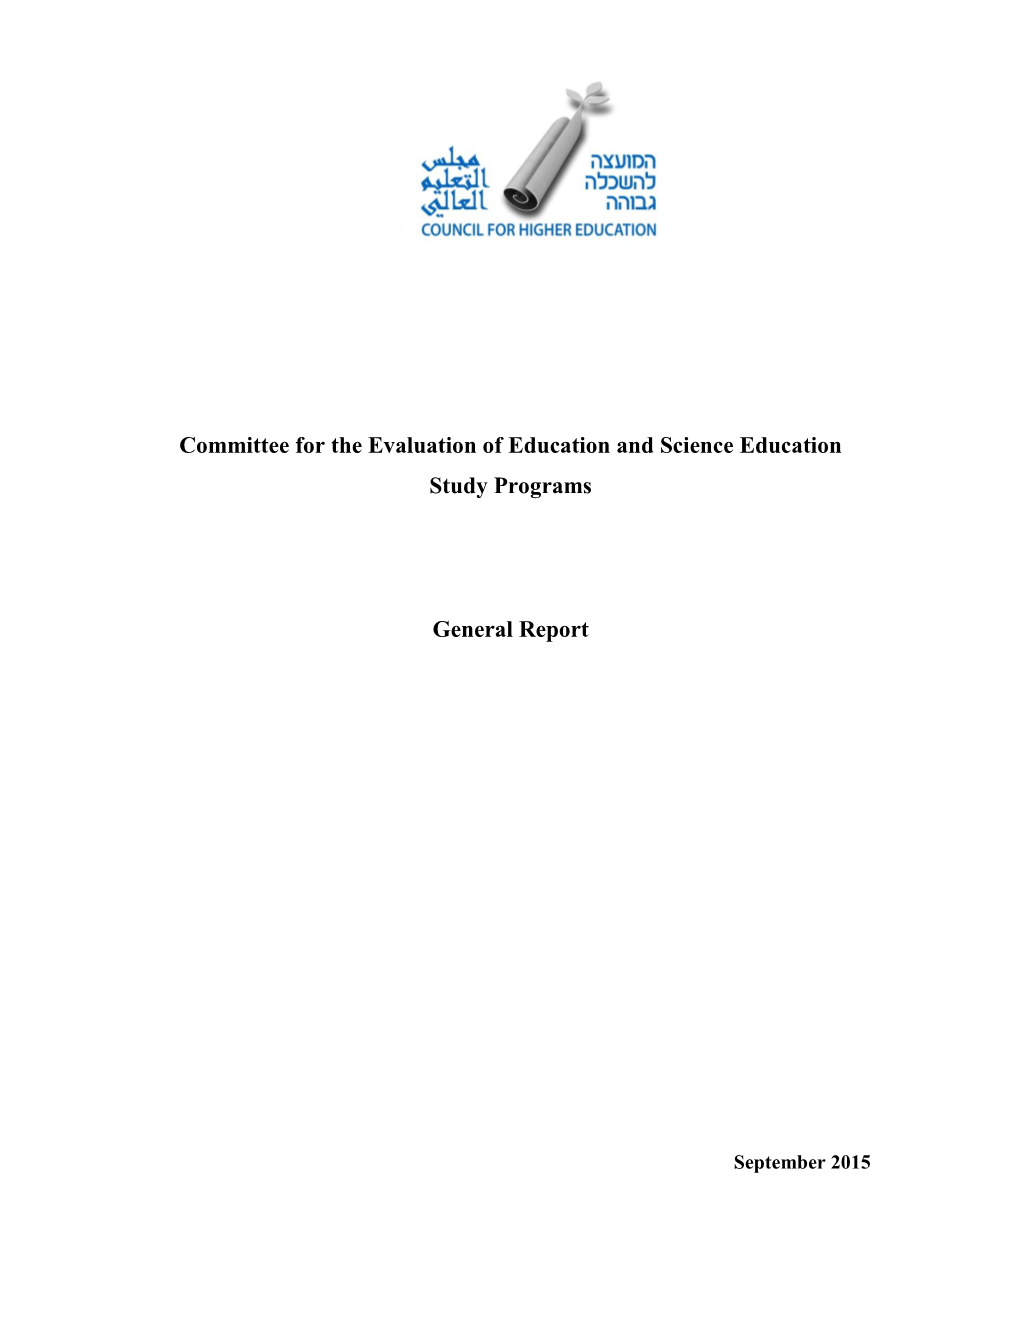 Committee for the Evaluation of Education and Science Education Study Programs